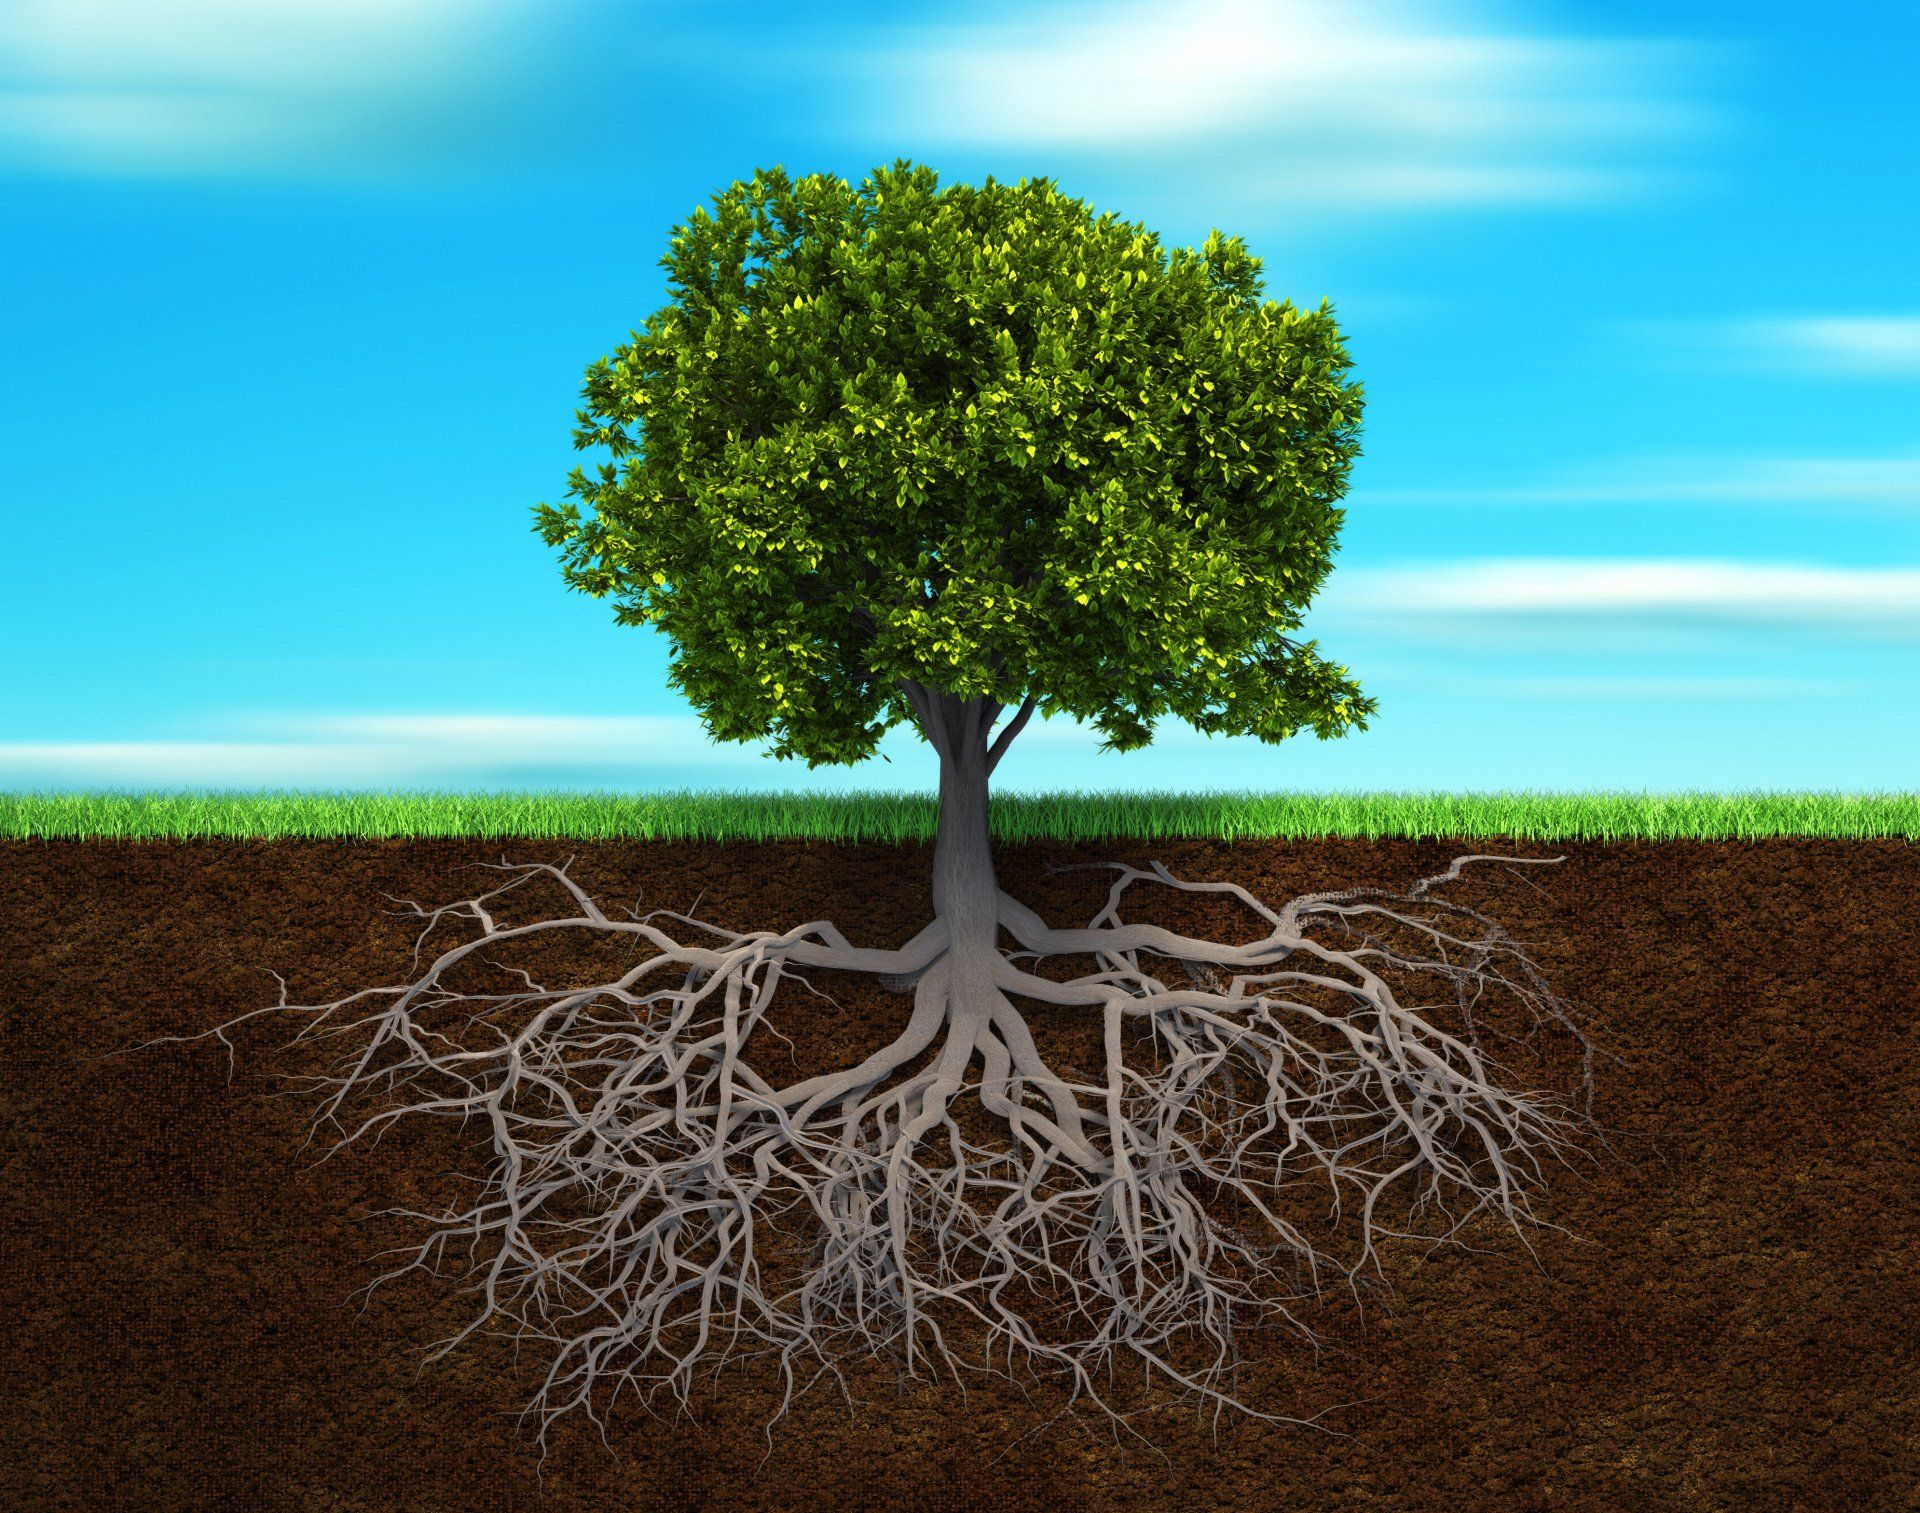 an illustration of a tree and its root system